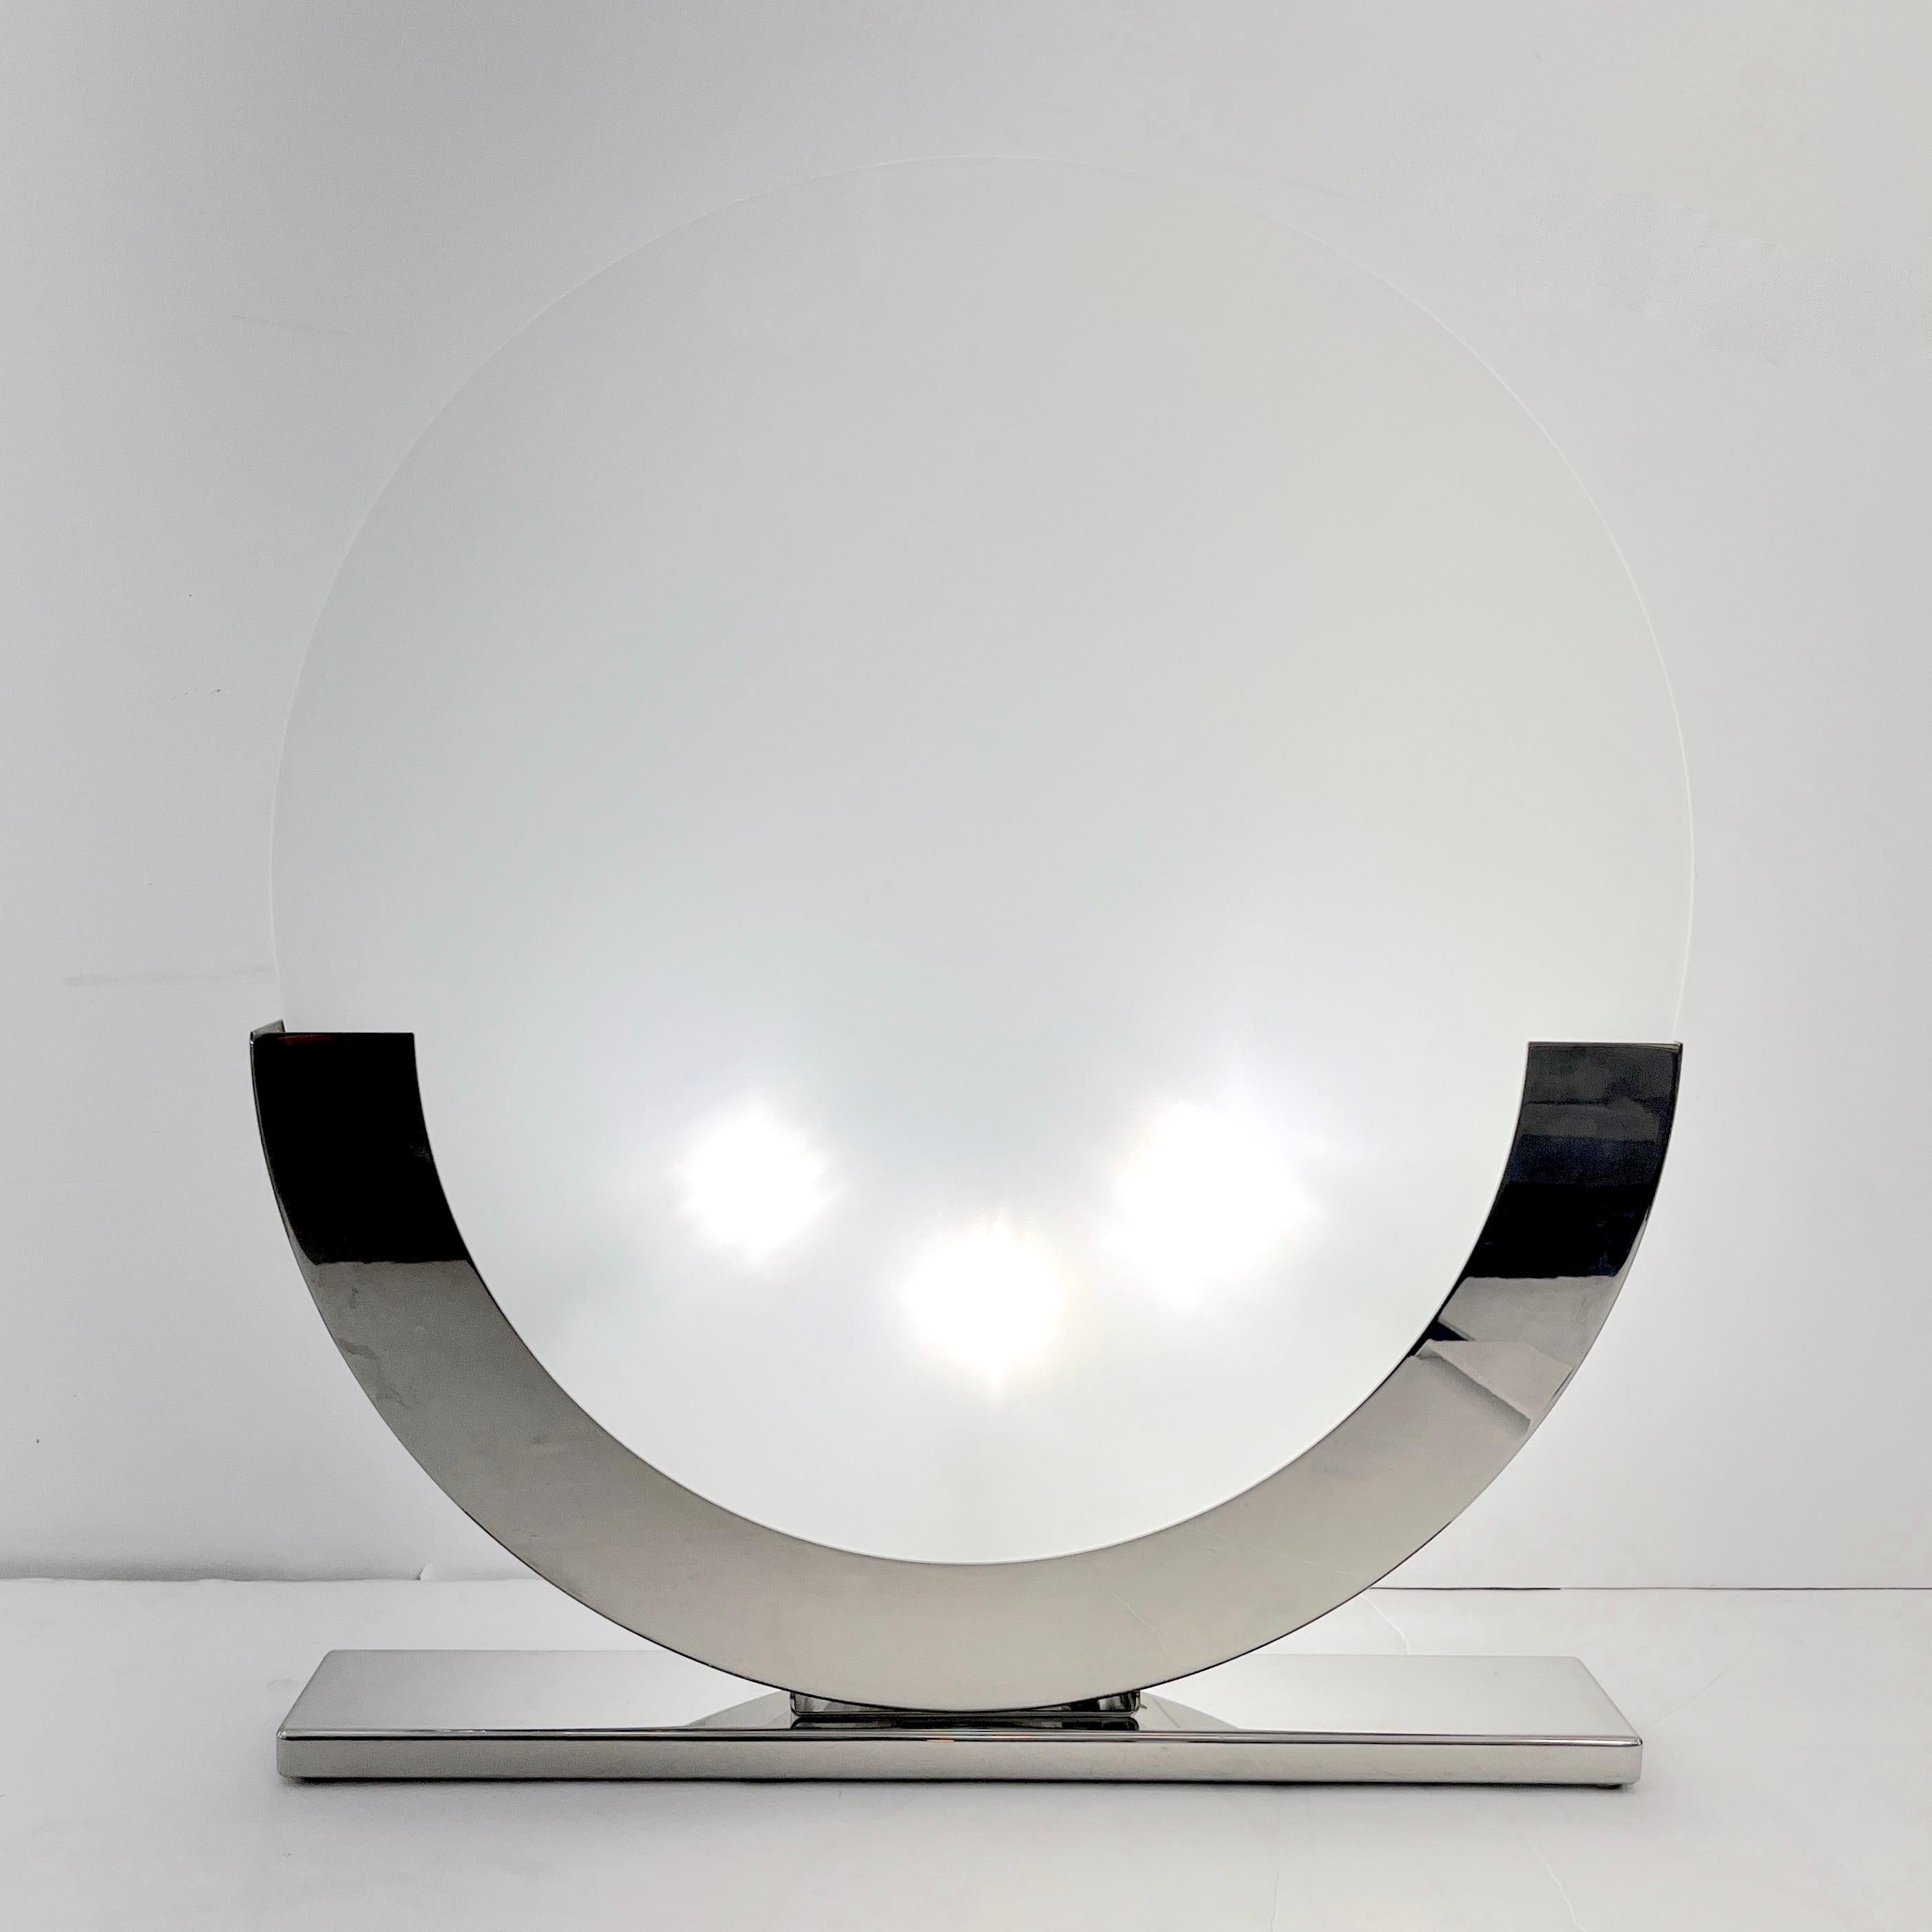 1990 exclusive Italian design lamp manufactured in Milan by a Company closed in the early 2000s, the Minimalist construction gives great elegance with its simplicity and uniqueness: Two high-quality frosted glass disks slide in a crescent-shaped